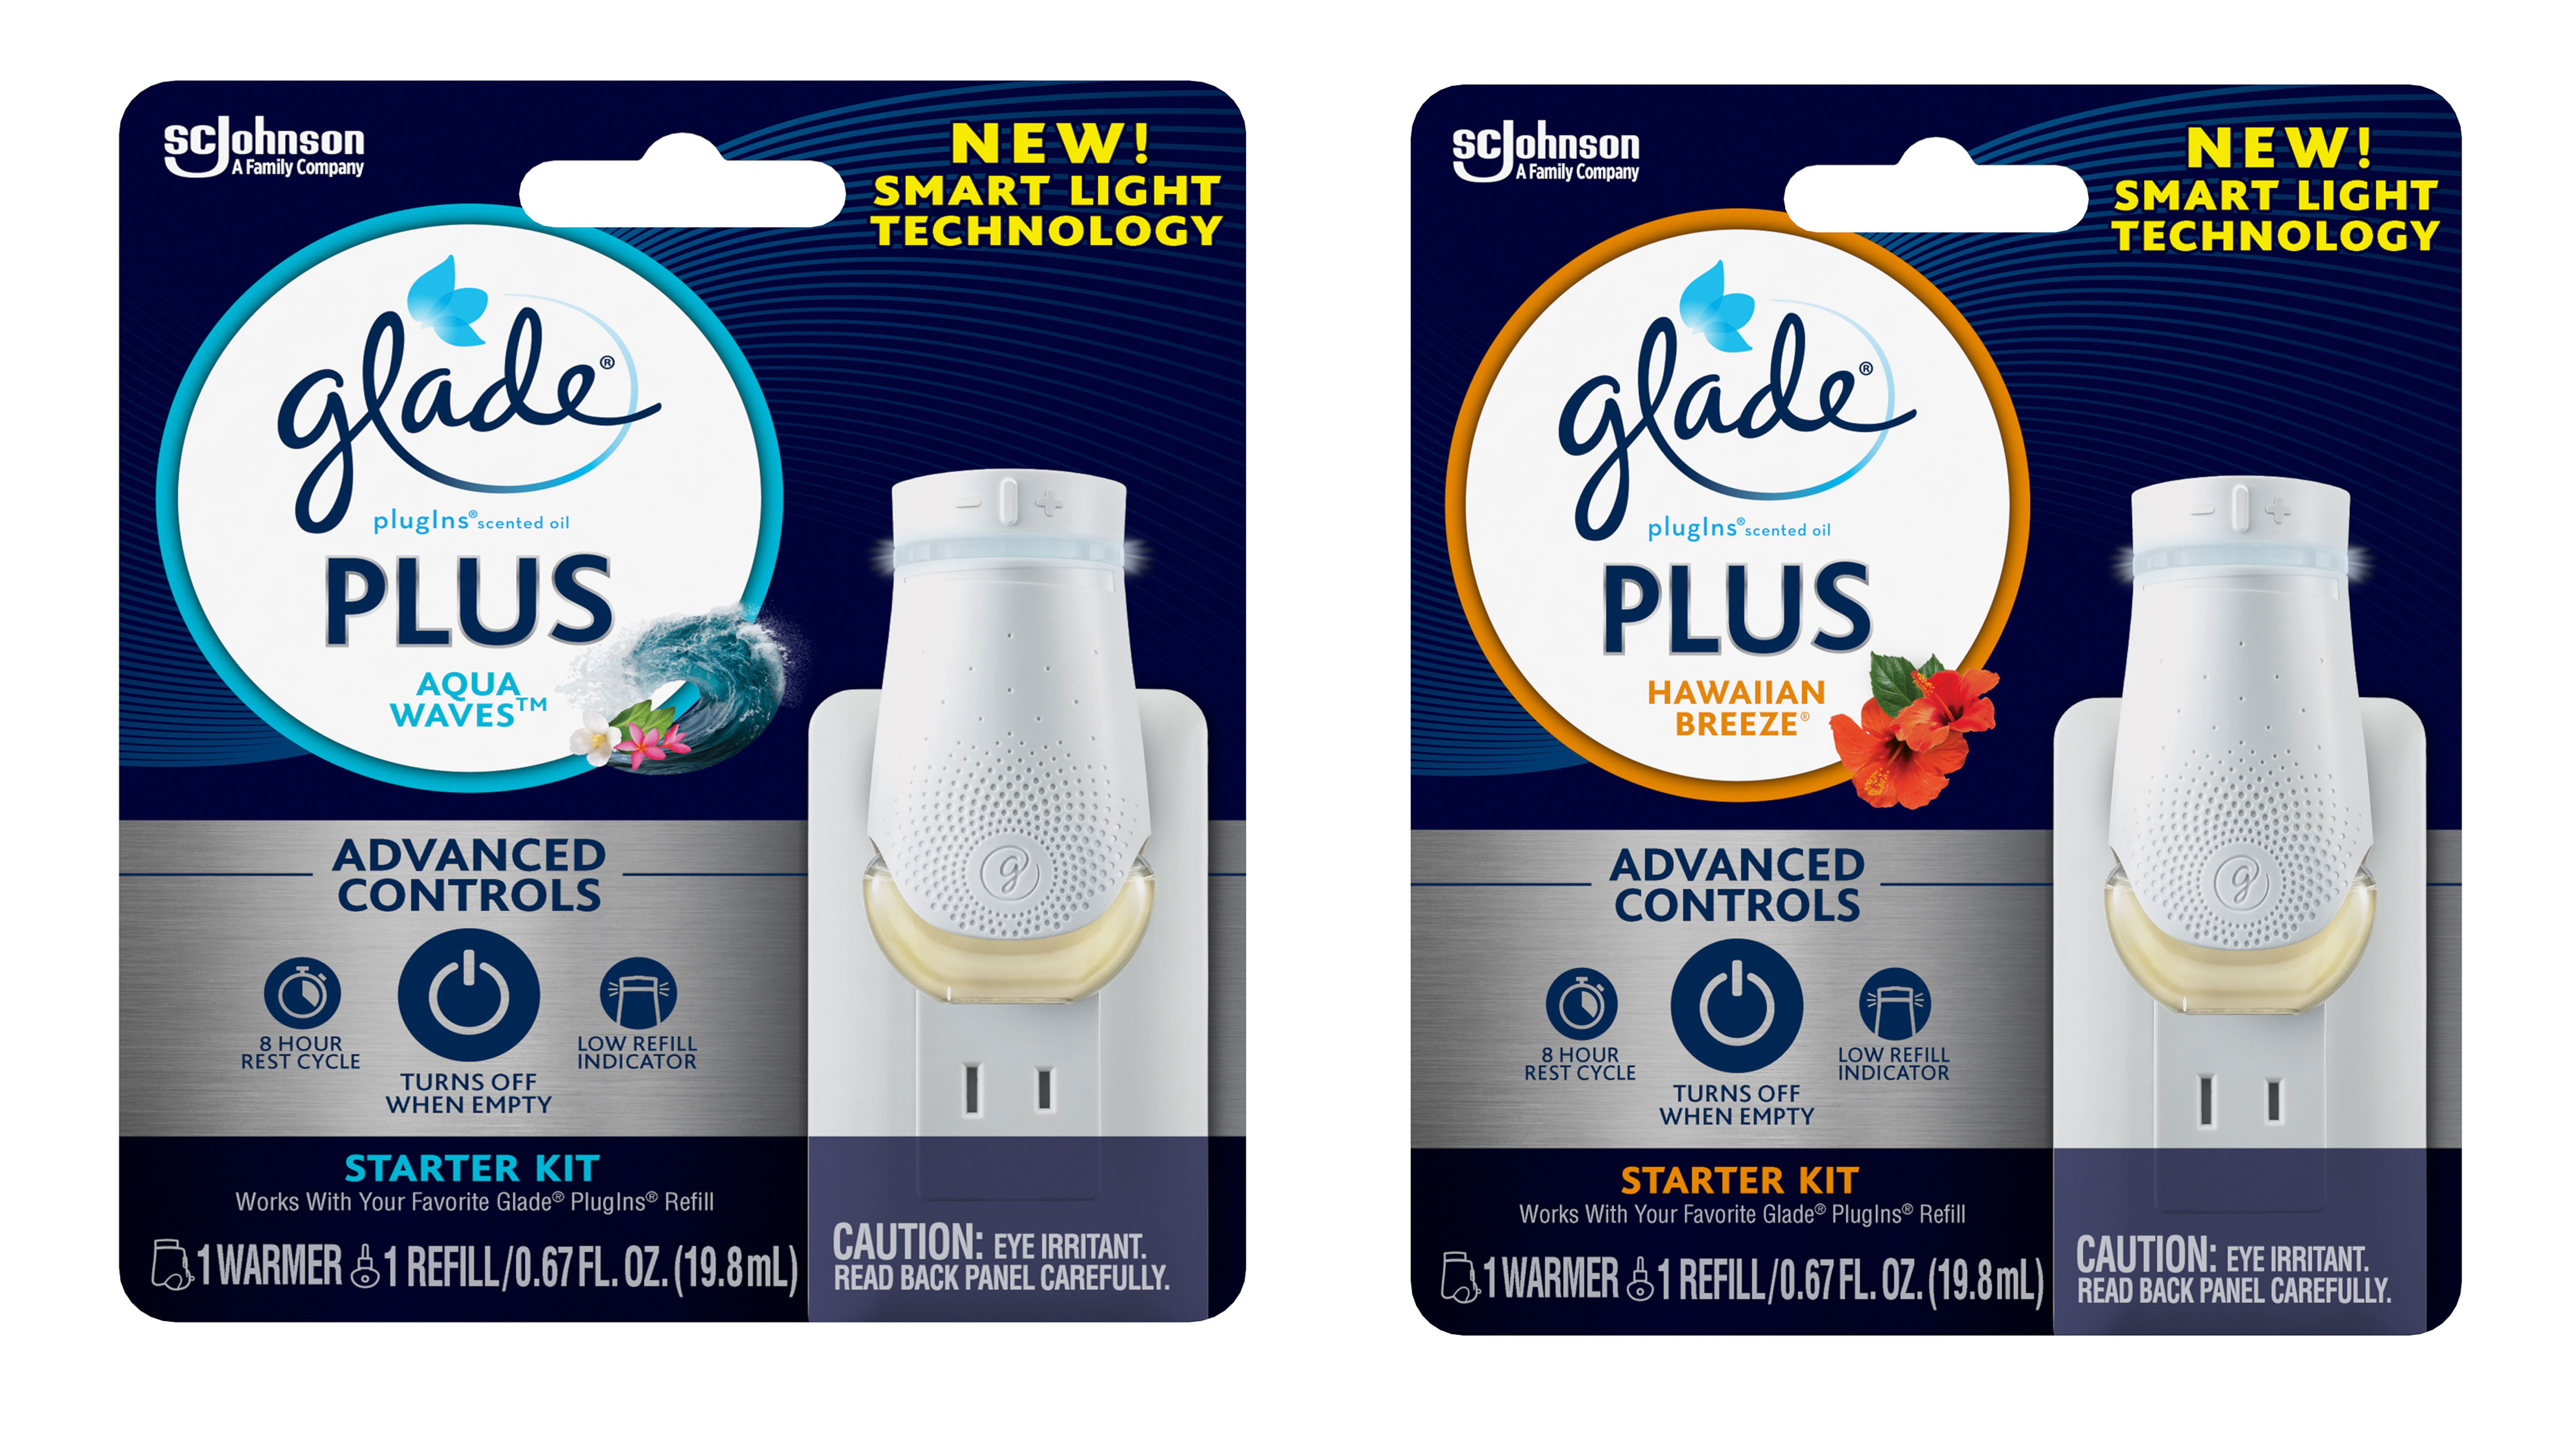 Energy-Efficient Glade® PlugIns® Scented Oil PLUS Launches in the United States - Hawaiian Breeze and Aqua Wave